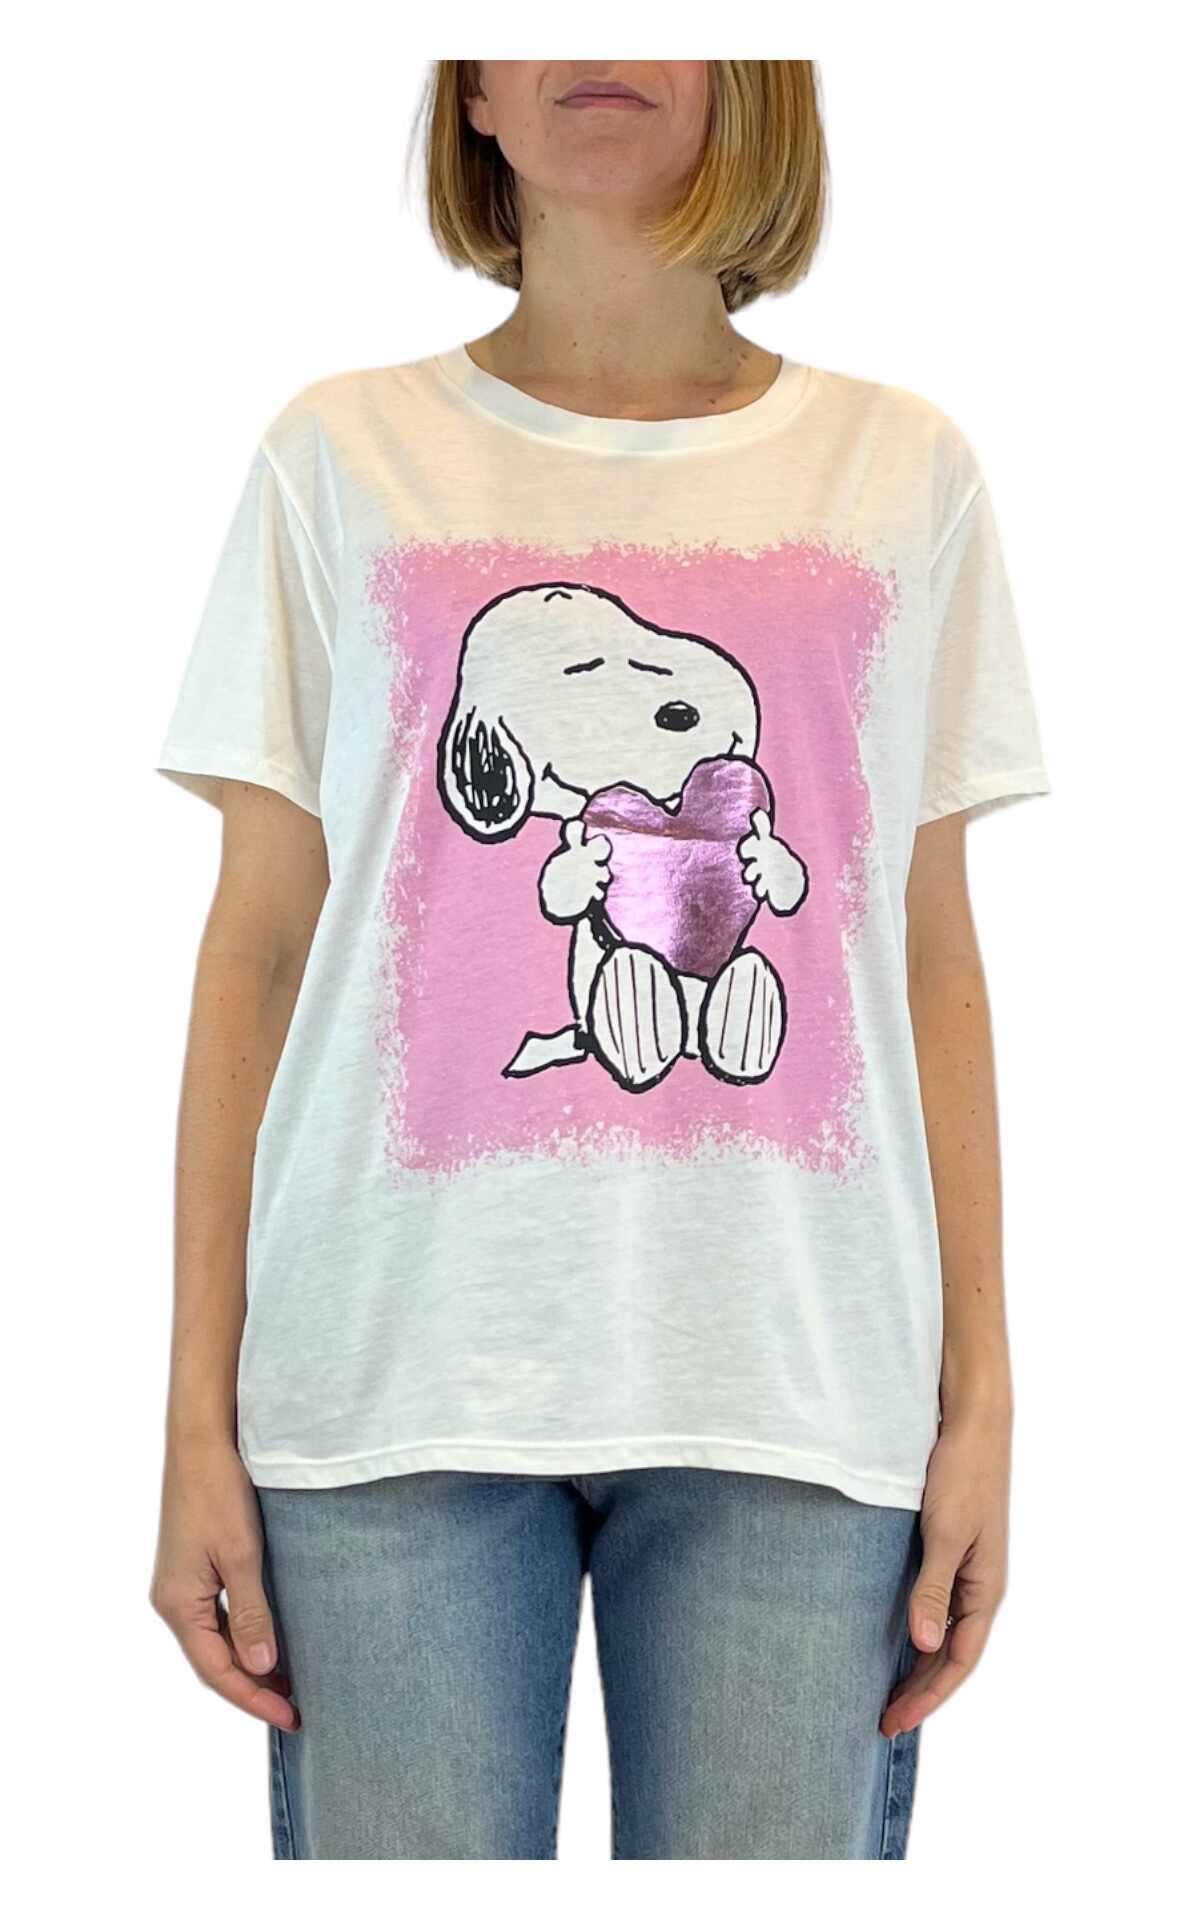 Off-on - T-shirt stampa snoopy - rosa